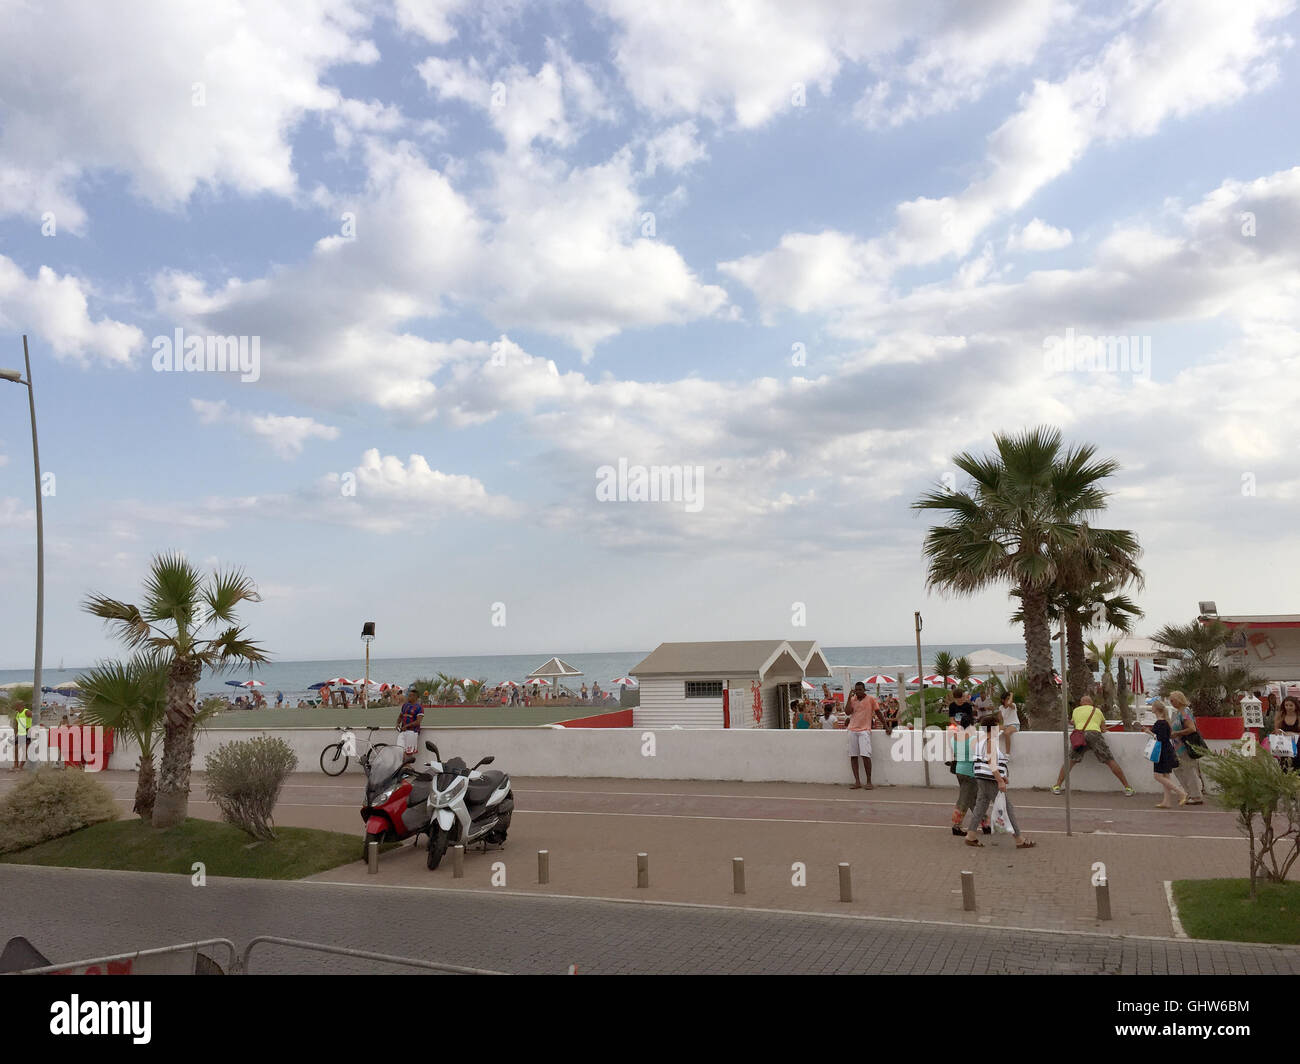 Rome, Italy. 7th Aug, 2016. View of a public bathing beach in Ostia near Rome, Italy, 7 August 2016. The booming business of public bathing beaches also brought illegal construction and corruption. Now, the EU wants to rid the leaseholders of their licences. PHOTO: SABINE DOBEL/dpa/Alamy Live News Stock Photo